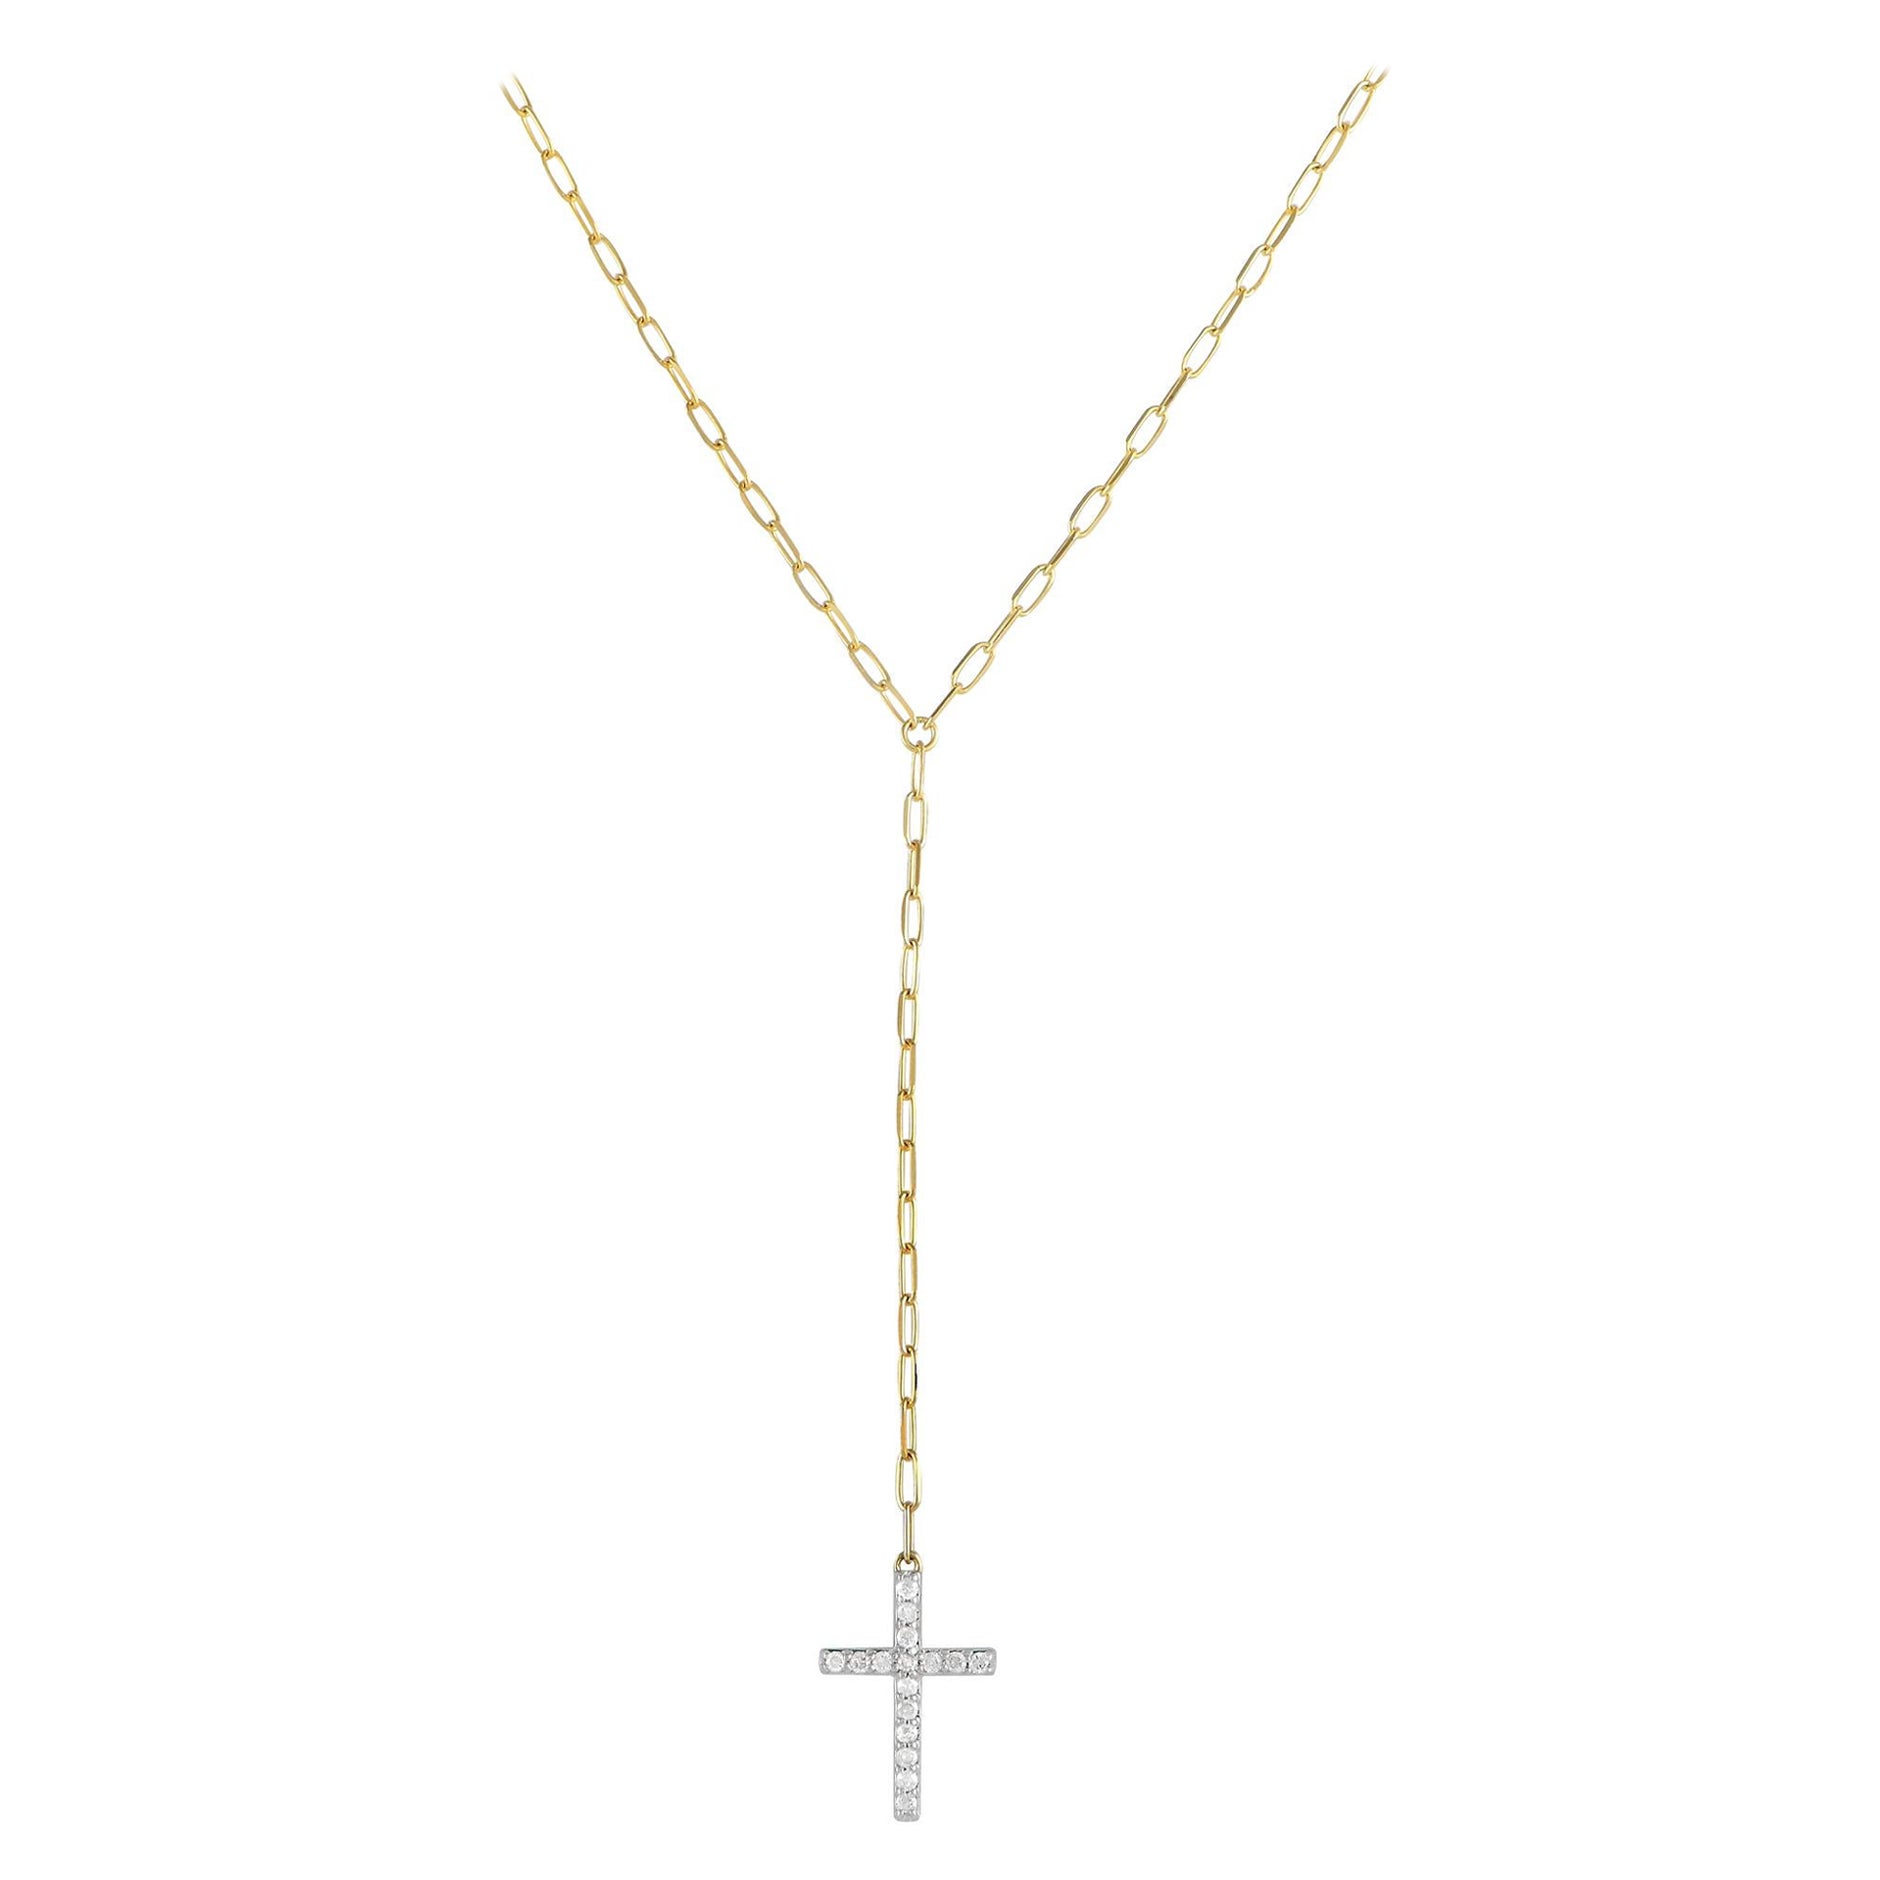 LB Exclusive 18K Yellow Gold 0.18ct Diamond Cross Link Necklace NK01133